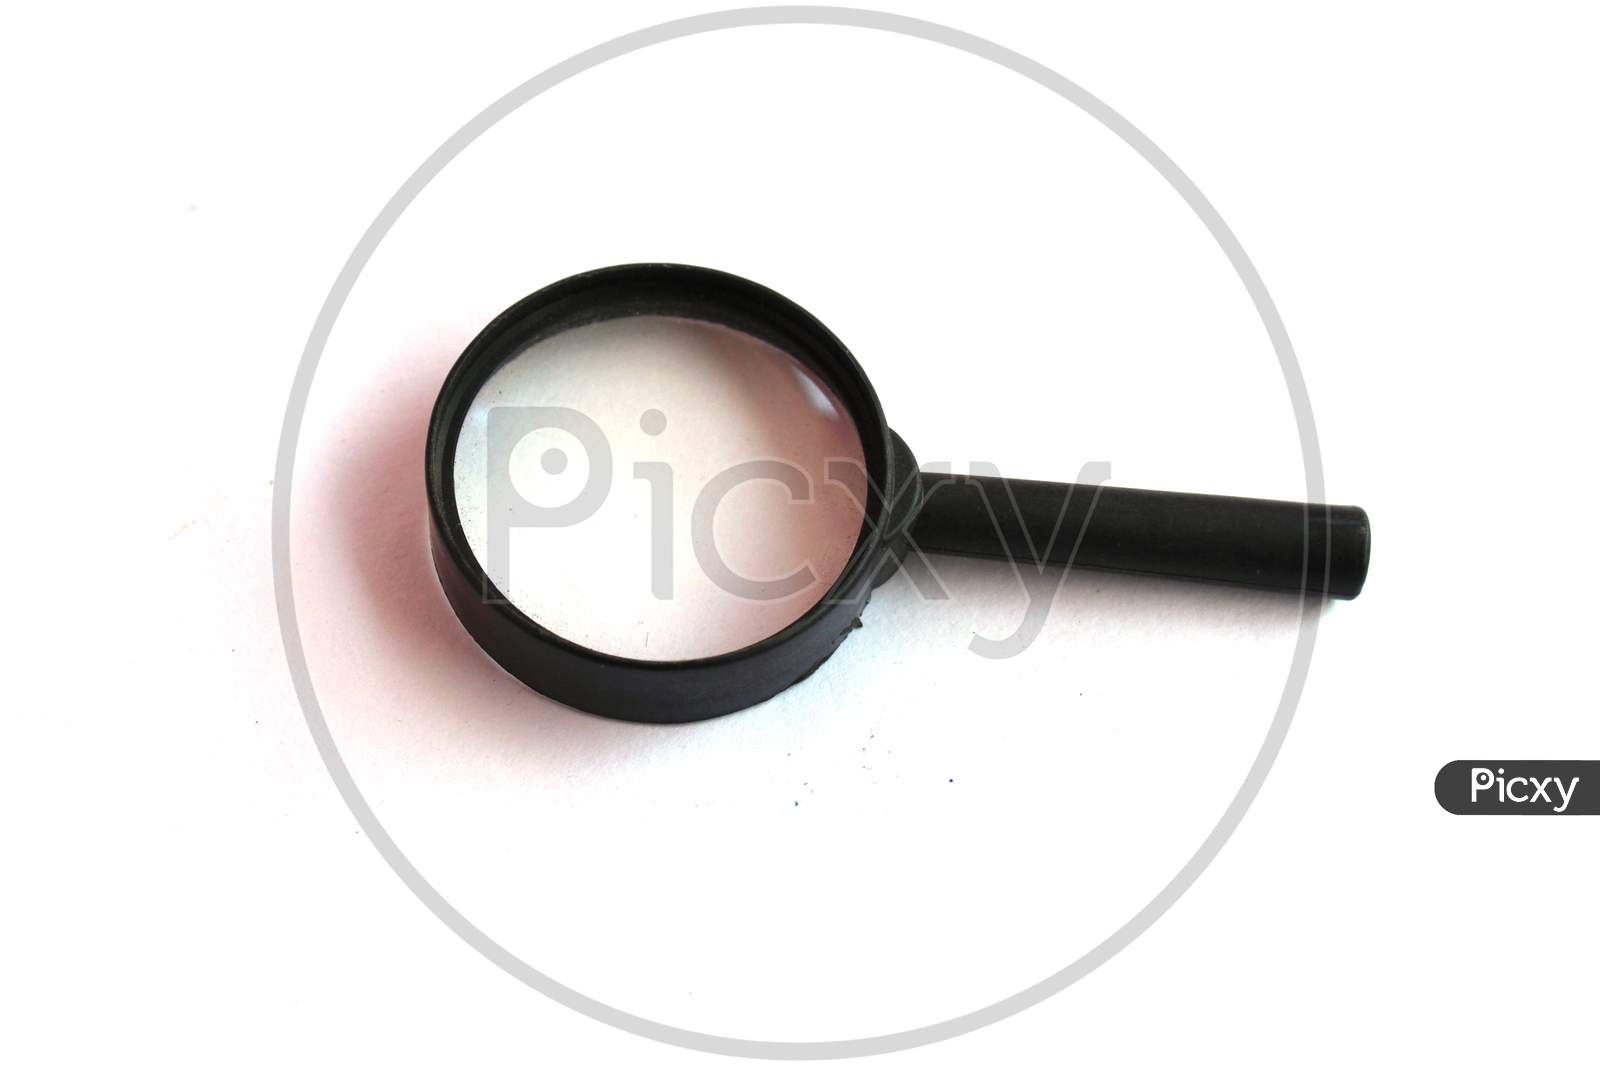 Close Up Single Magnifying Glass With Black Handle